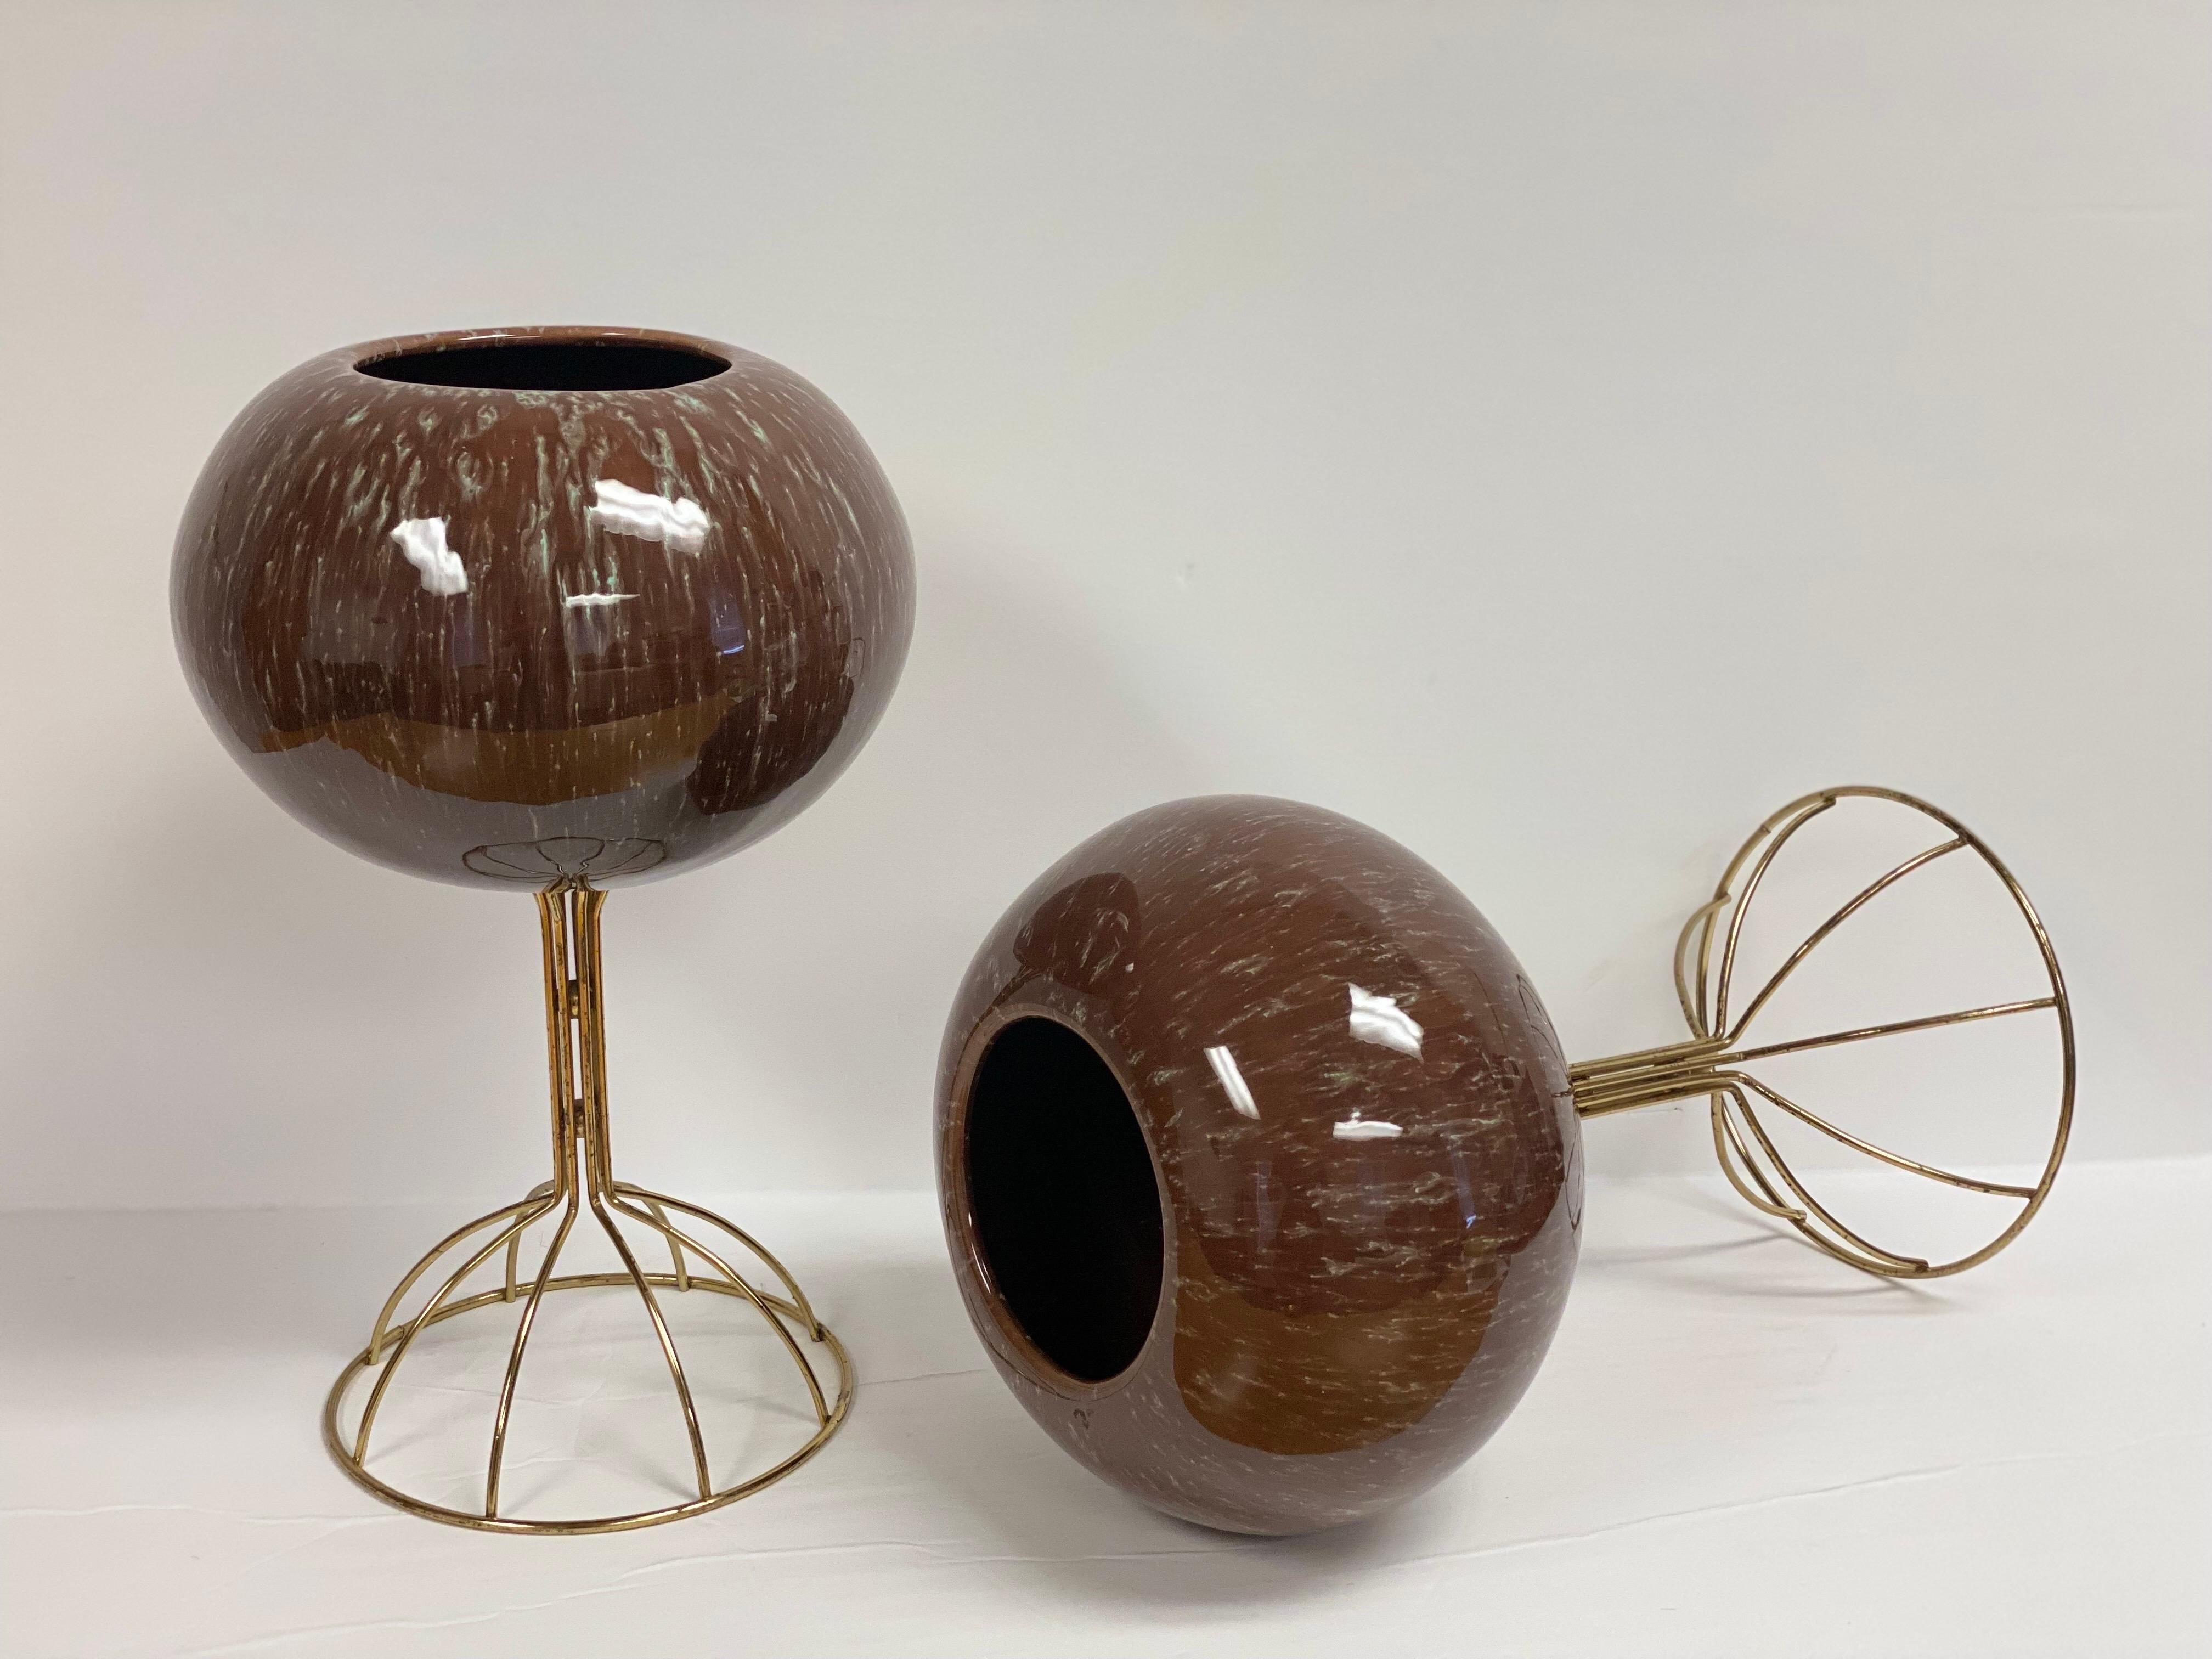 We are very pleased to offer a pair of vintage, Italian ceramic planters, circa the 1960s. Perfect for highlighting your favorite botanicals into any space, each planter showcases a beautiful, glazed brown ceramic sphere supported by a delicate and